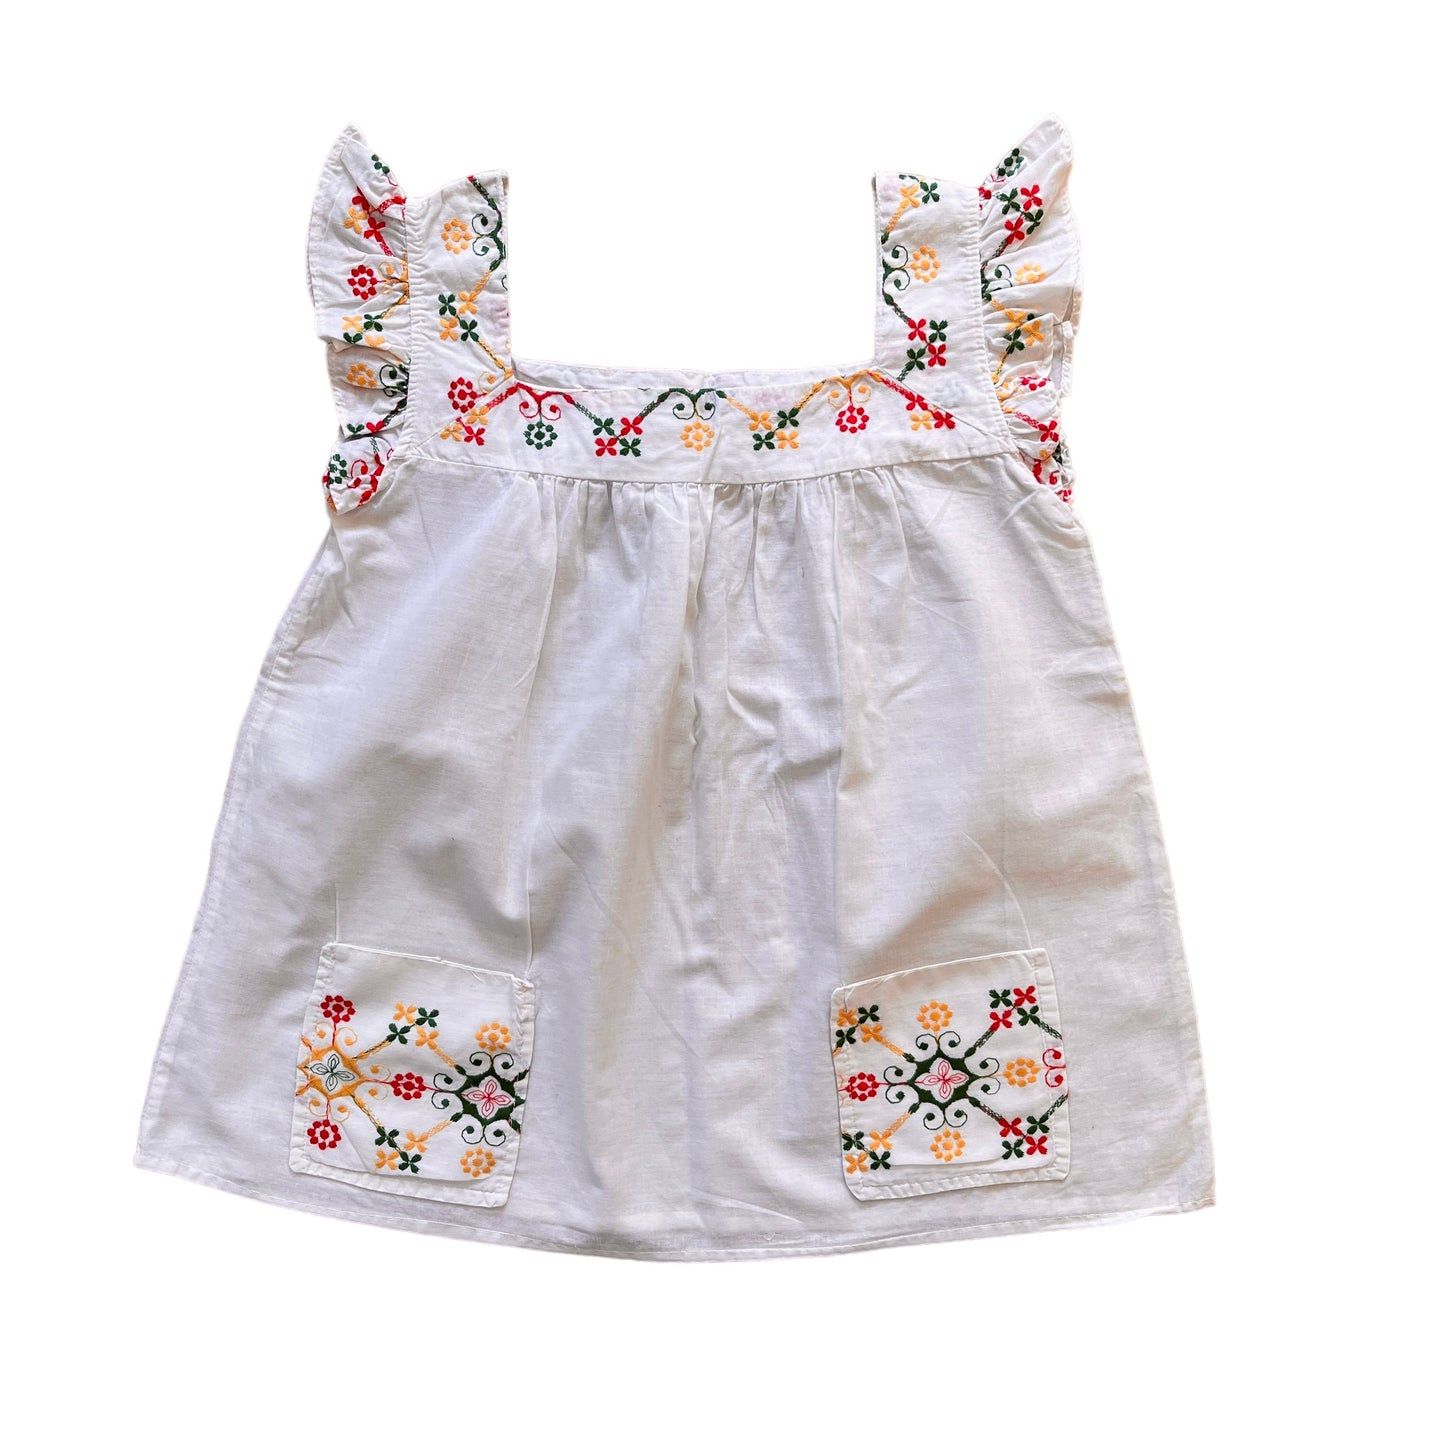 Vintage 1970s White Boho Folk Embroidered Top 10-12 Years